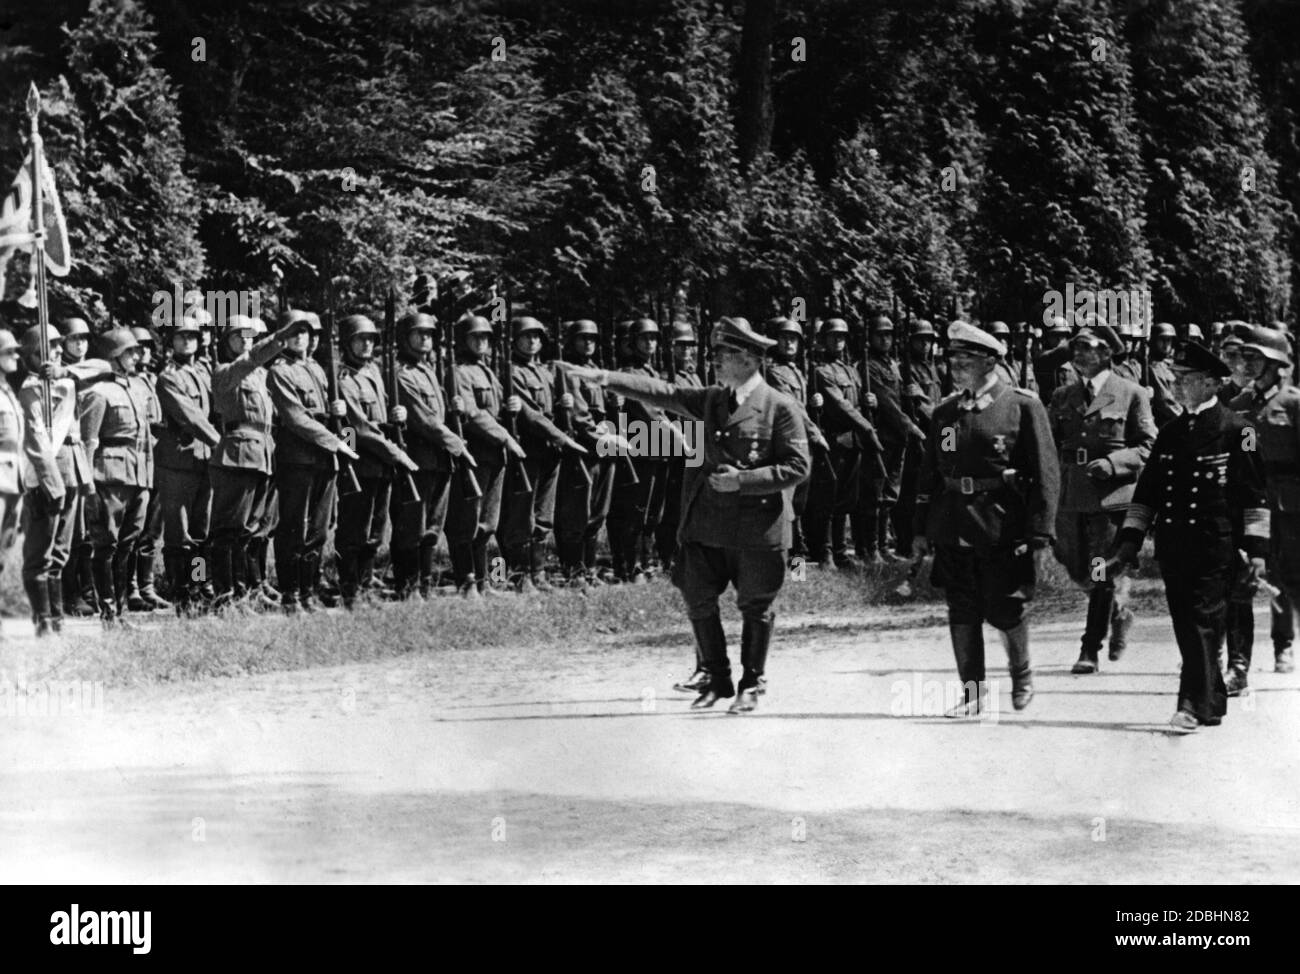 The colonels of the Navy and Air Force inspect Wehrmacht soldiers after they had defeated the French army after a short war. The next day, the Chief of OKW, Keitel, was to dictate the terms of the armistice to the French government on behalf of Hitler in the historic forest of Compiegene in the wagon in which the surrender of the German Empire was signed in 1918. The wagon had been transported here from a museum for this special purpose. Stock Photo